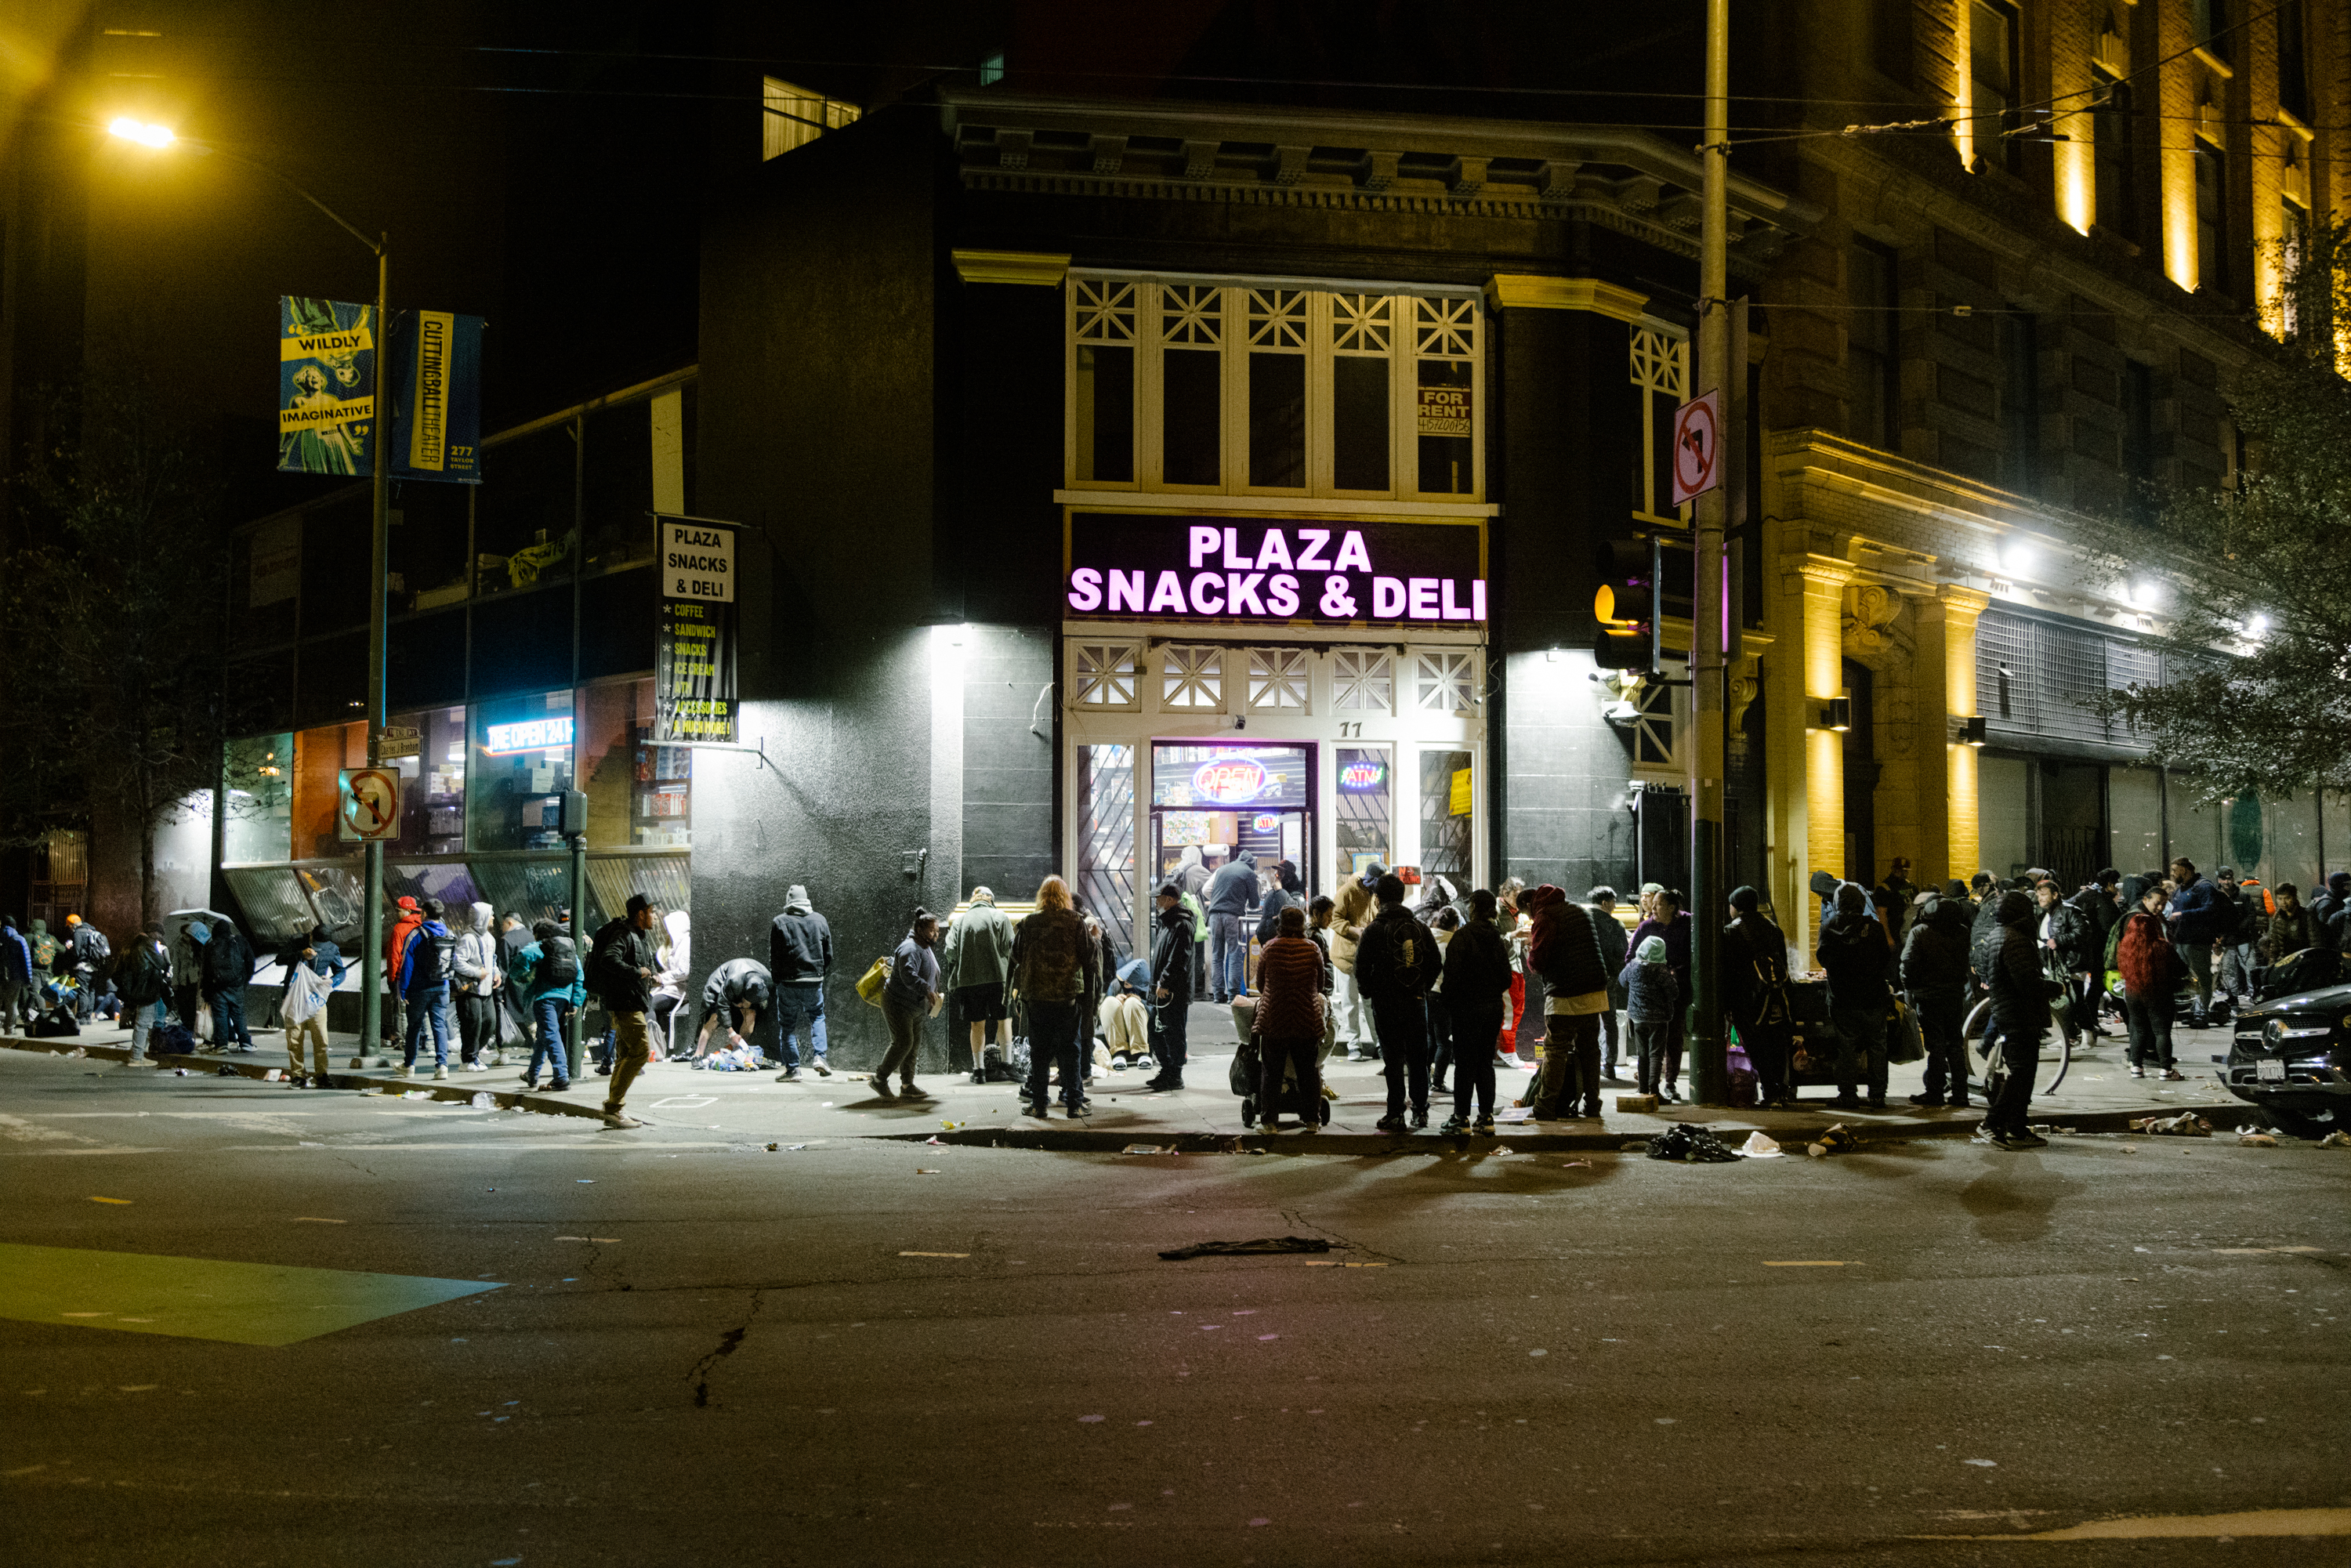 A bustling night scene outside 'Plaza Snacks & Deli', with a crowd of people on the sidewalk.